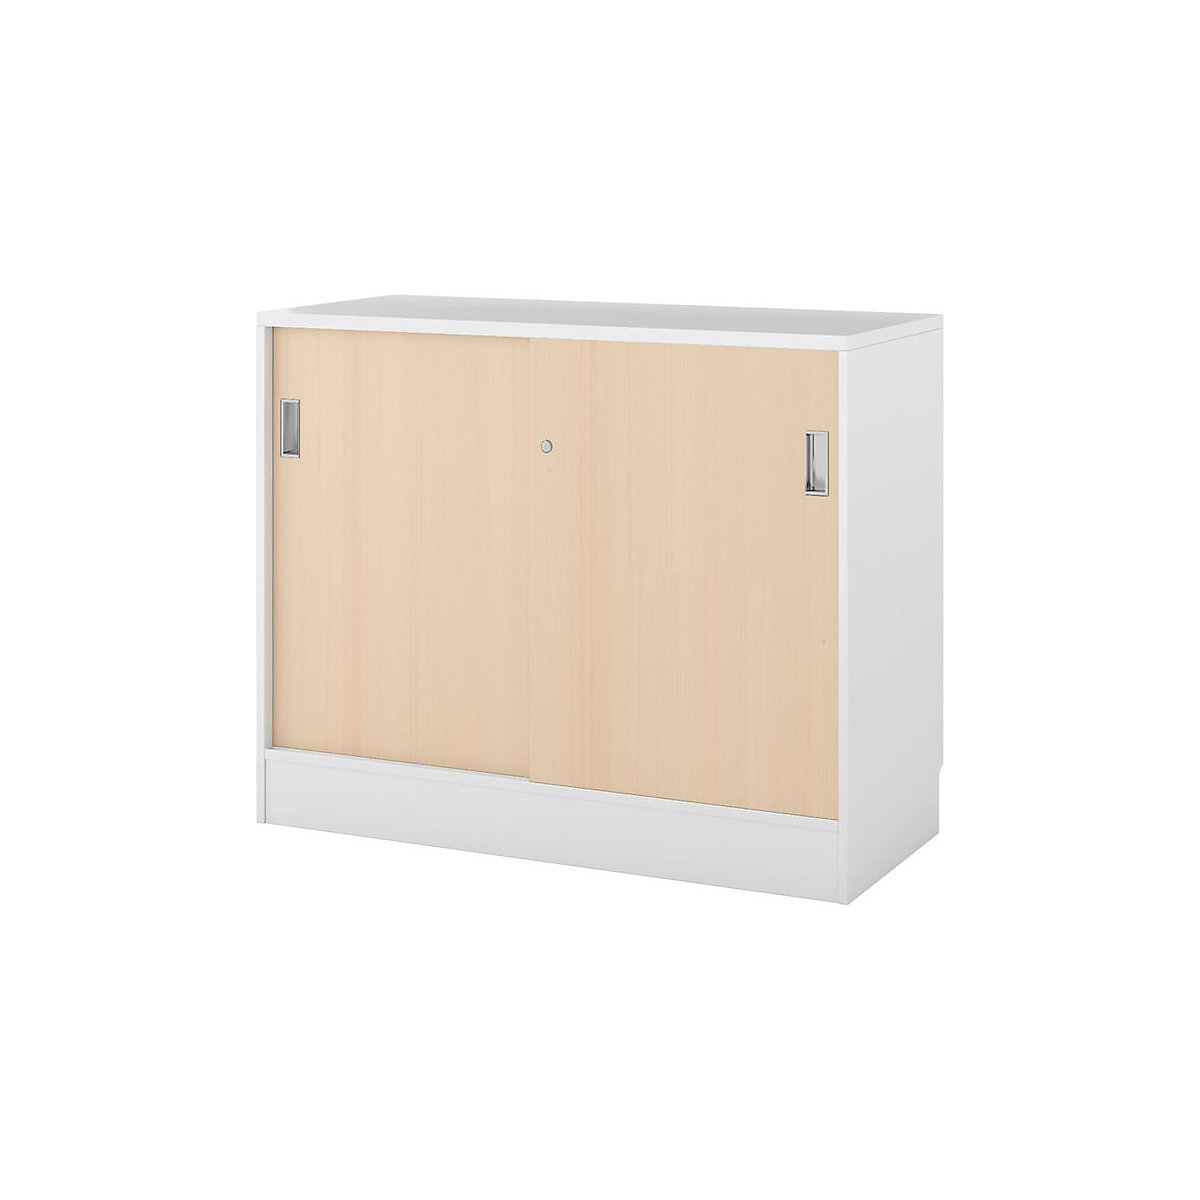 Chicago cupboard with sliding doors, HxWxD 948 x 1215 x 400 mm, brushed white / birch-3